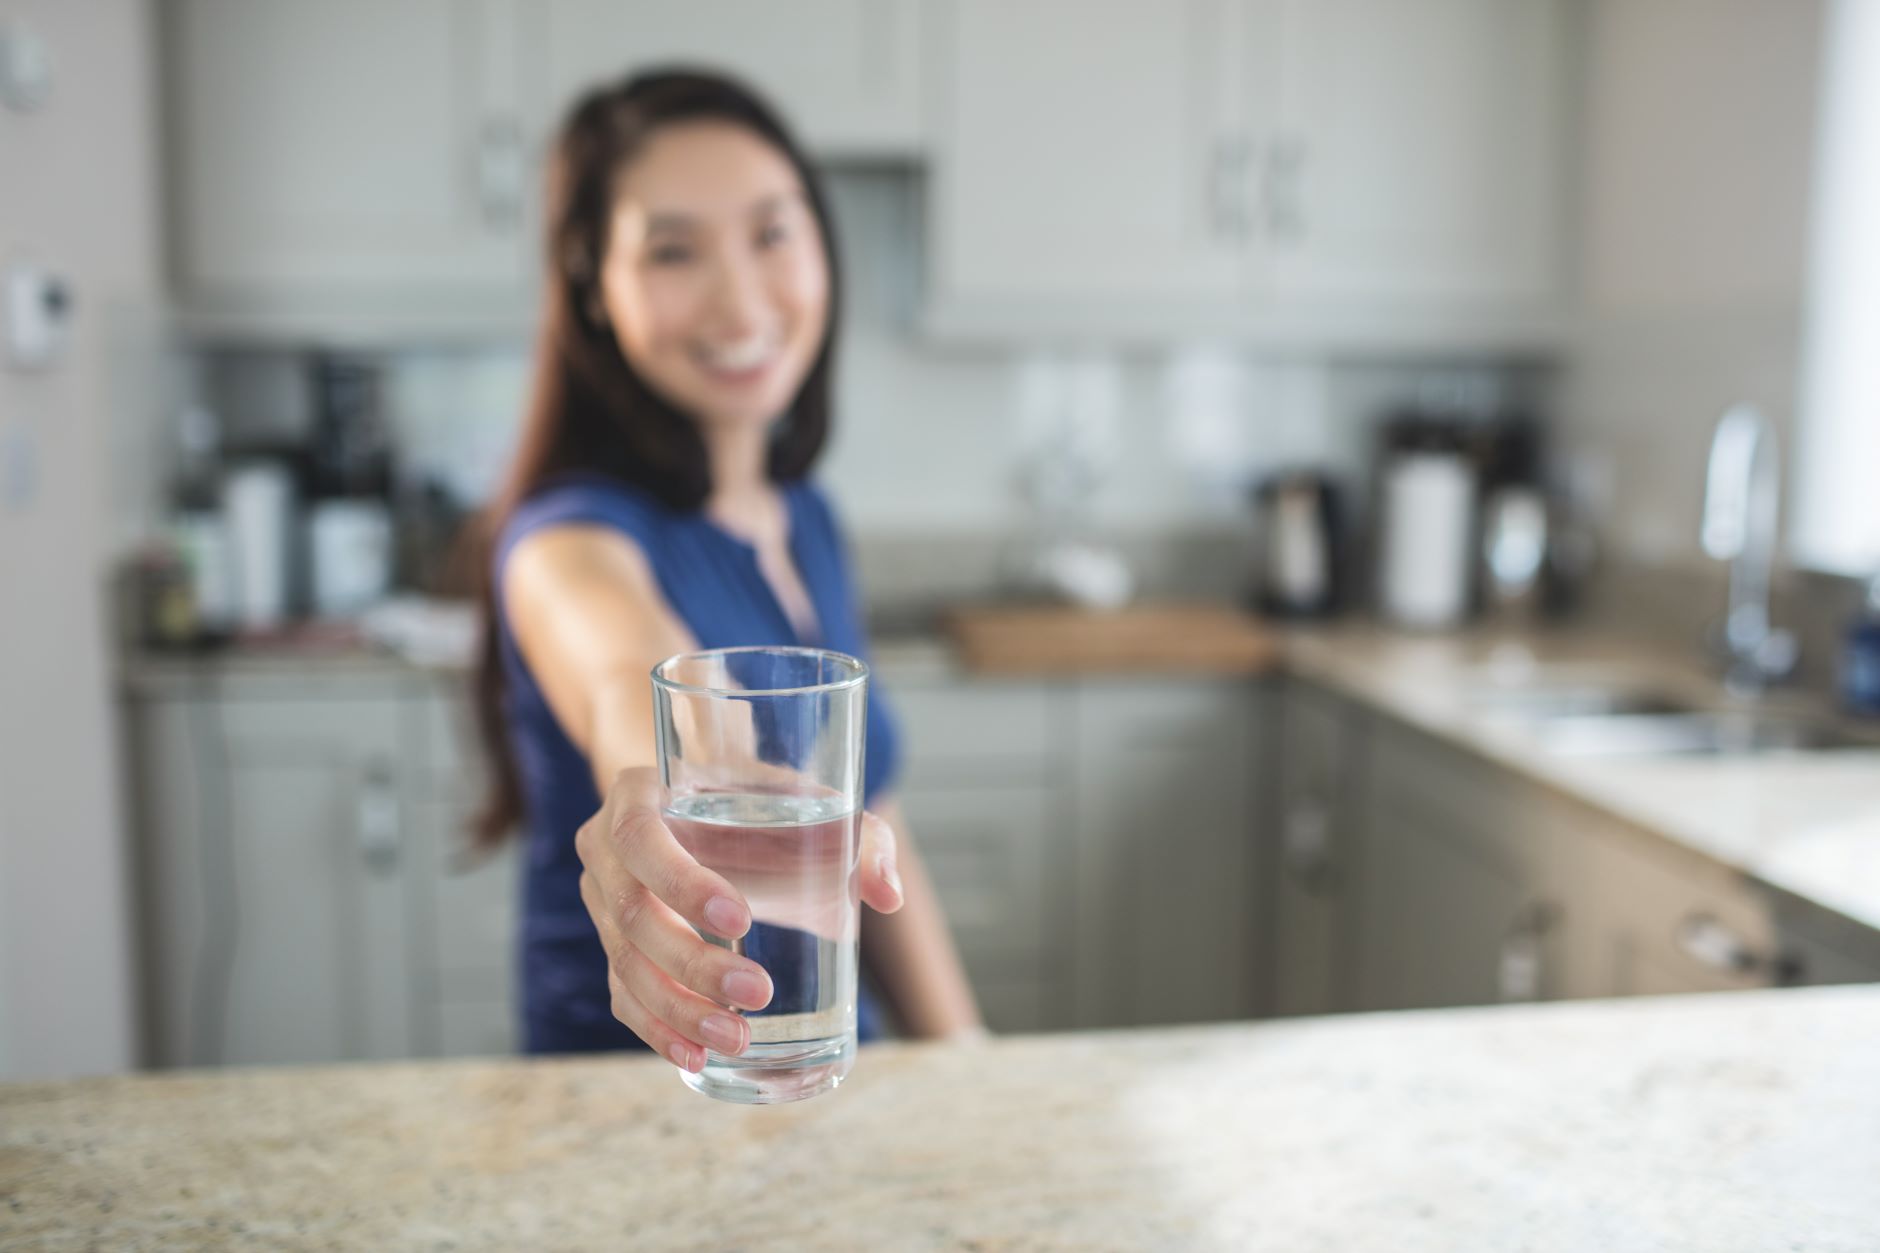 15180160-young-woman-holding-a-glass-of-water-in-kitchen2.jpg